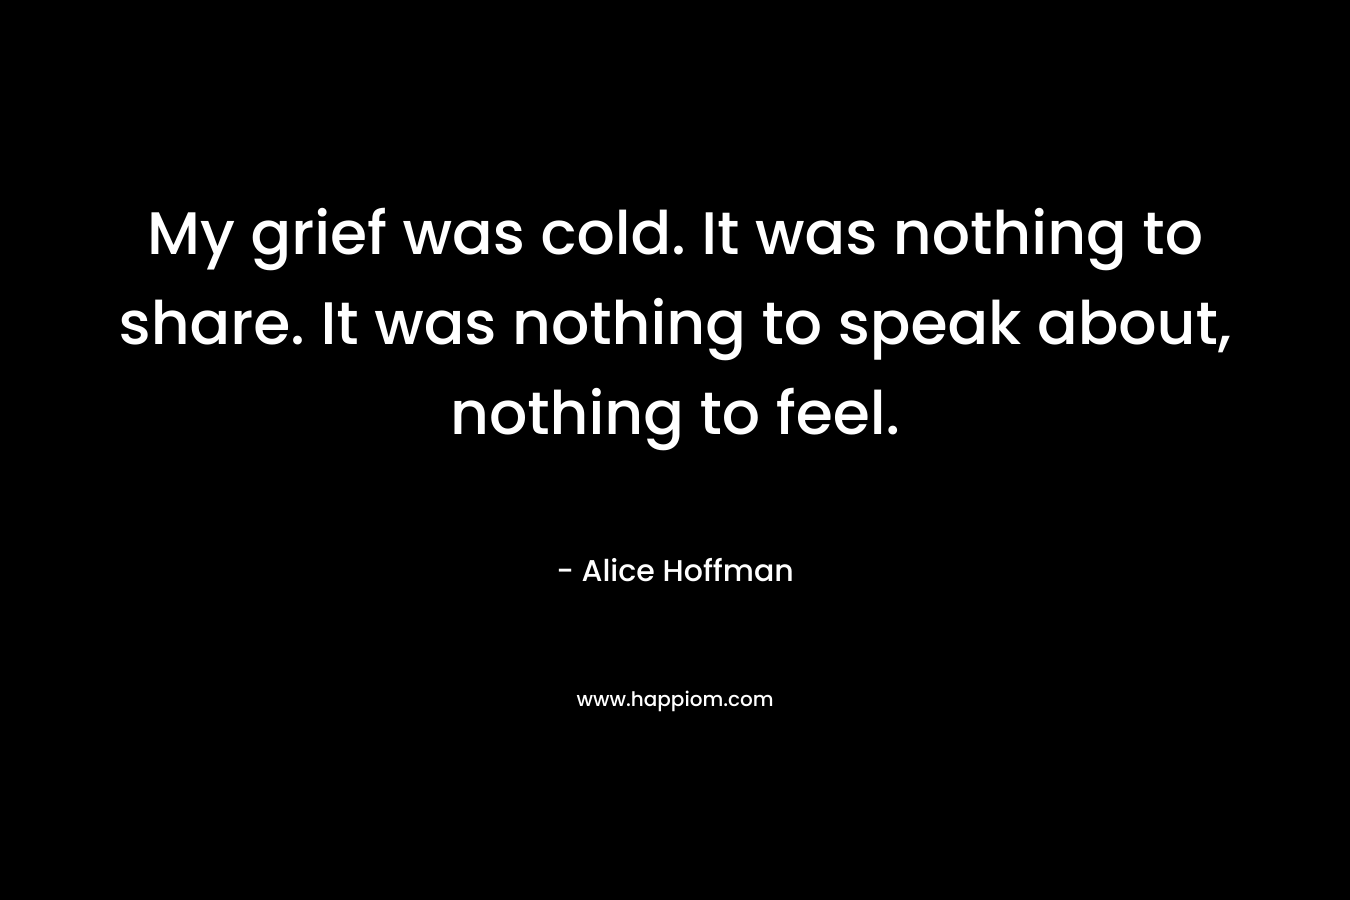 My grief was cold. It was nothing to share. It was nothing to speak about, nothing to feel.